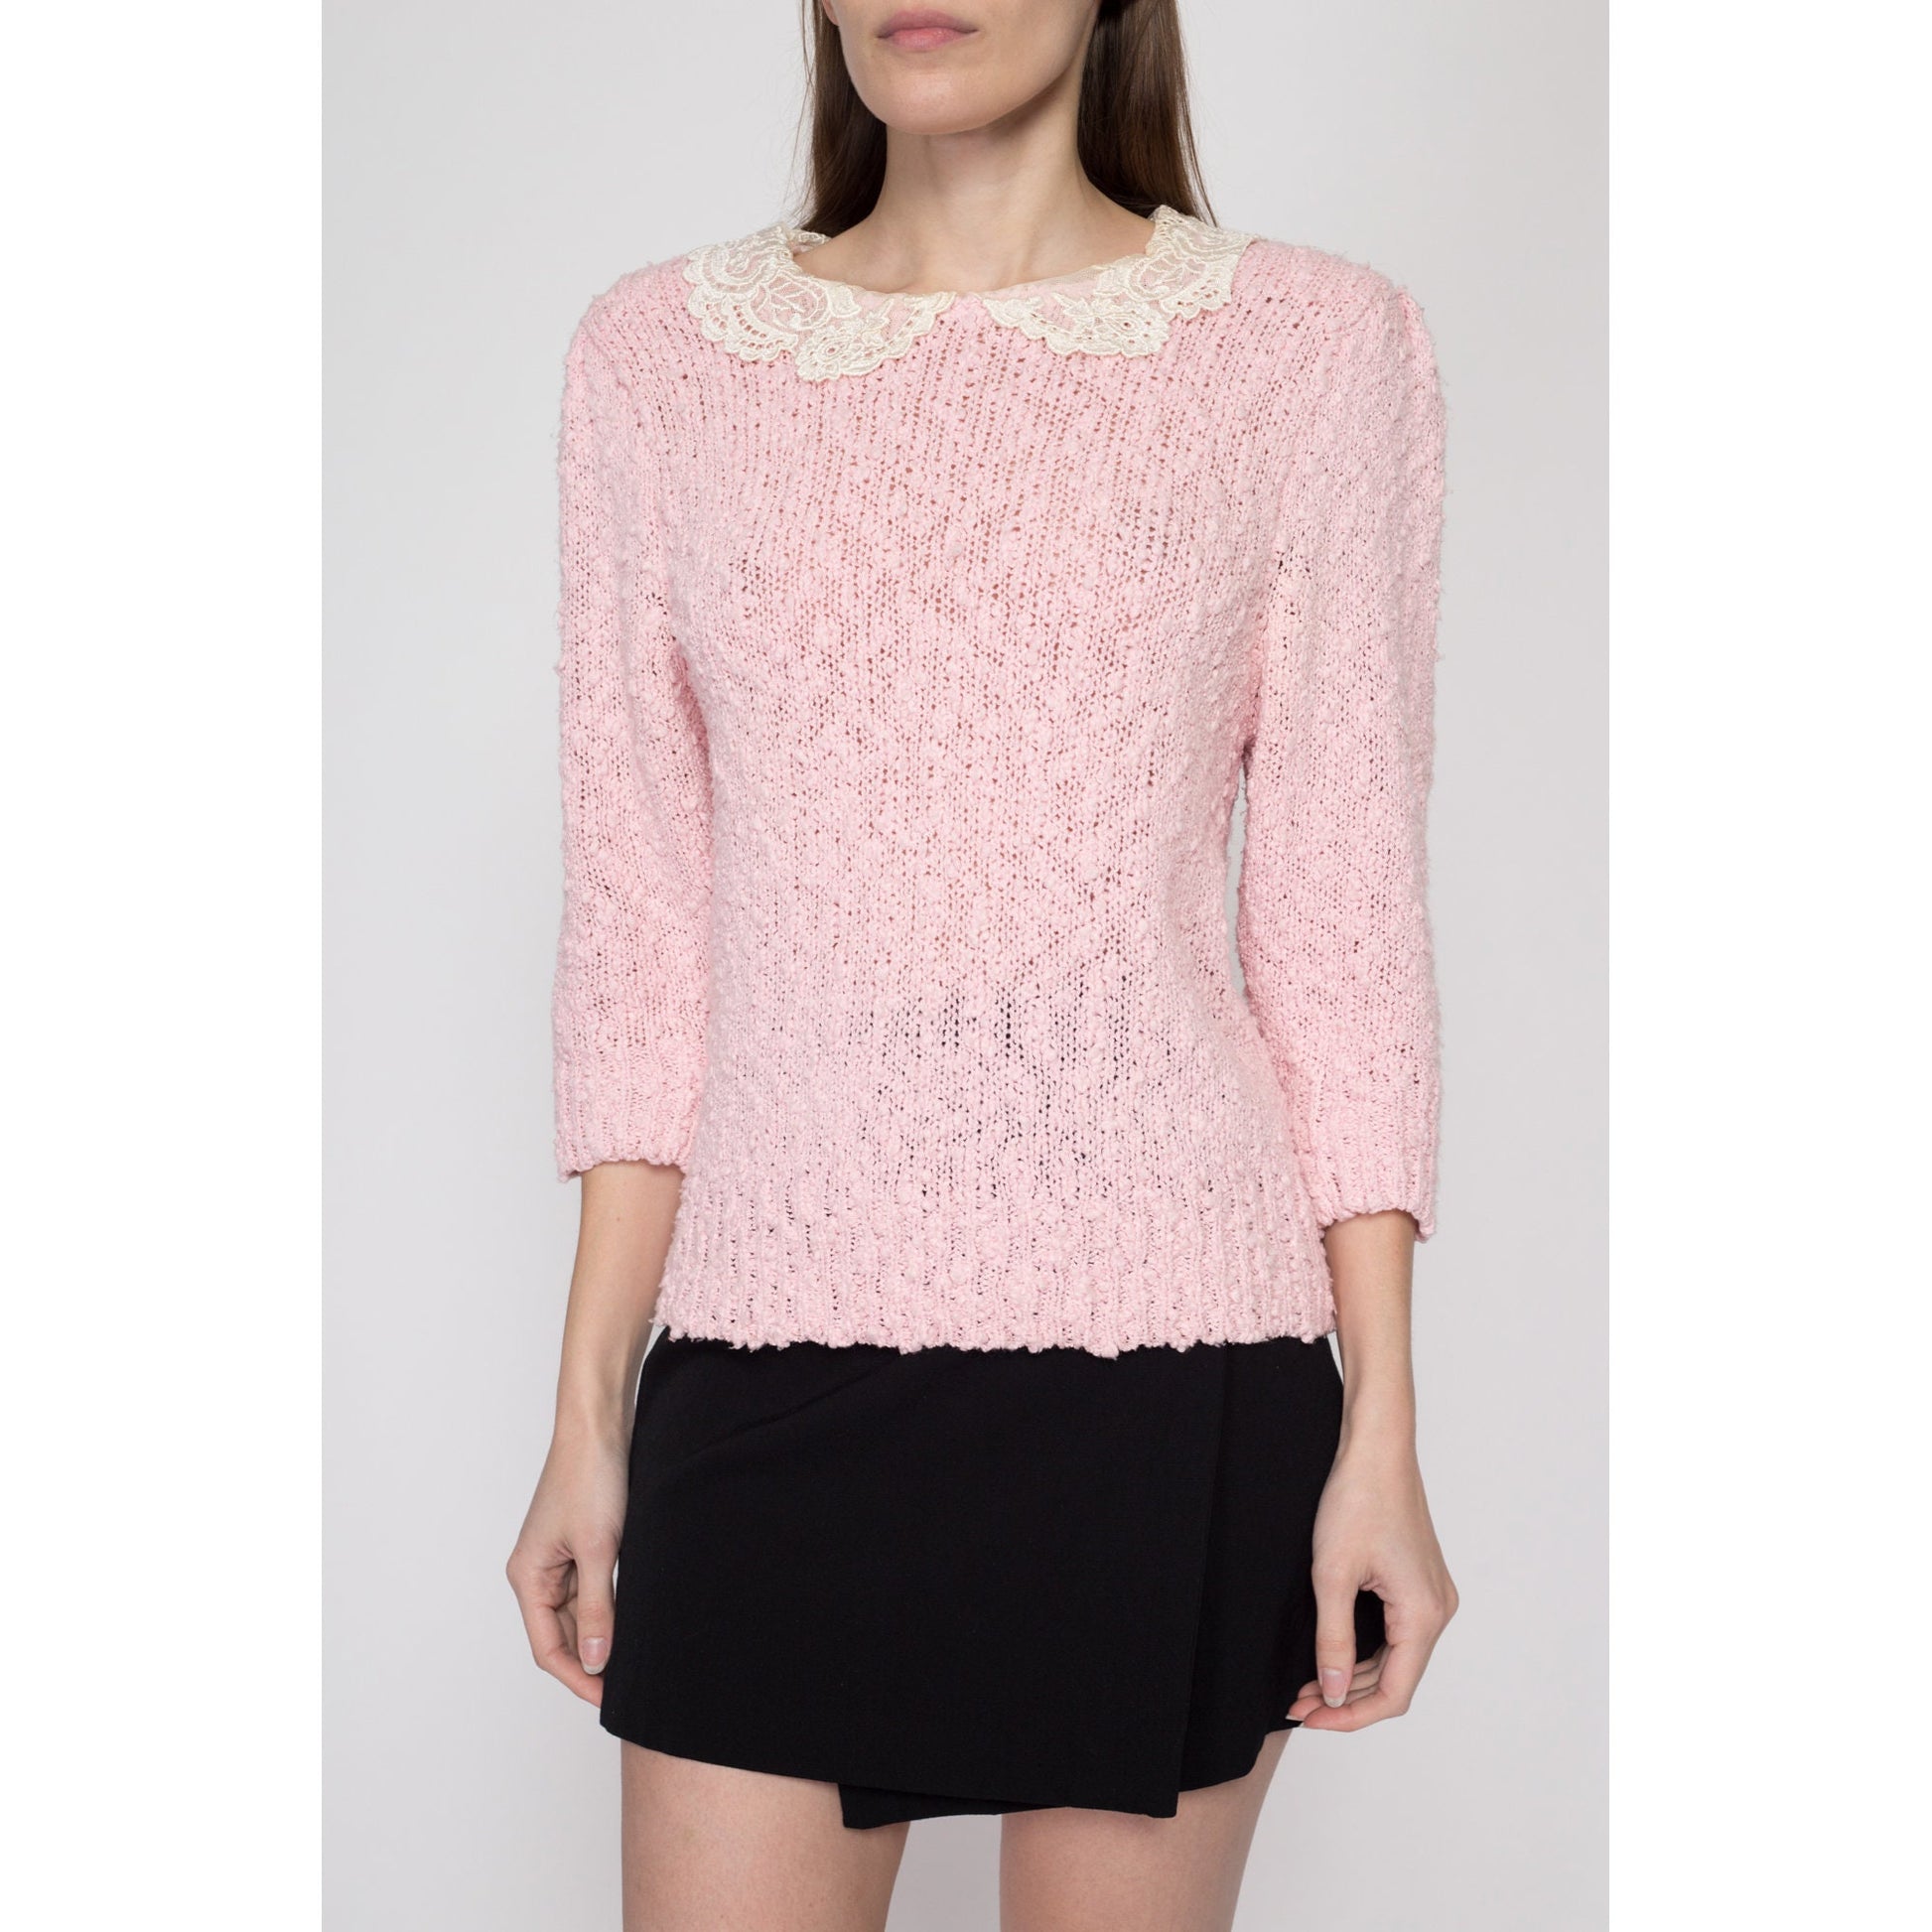 Medium 80s Pink Lace Collar Boucle Knit Sweater | Cute Retro Vintage 3/4 Sleeve Girly Pullover